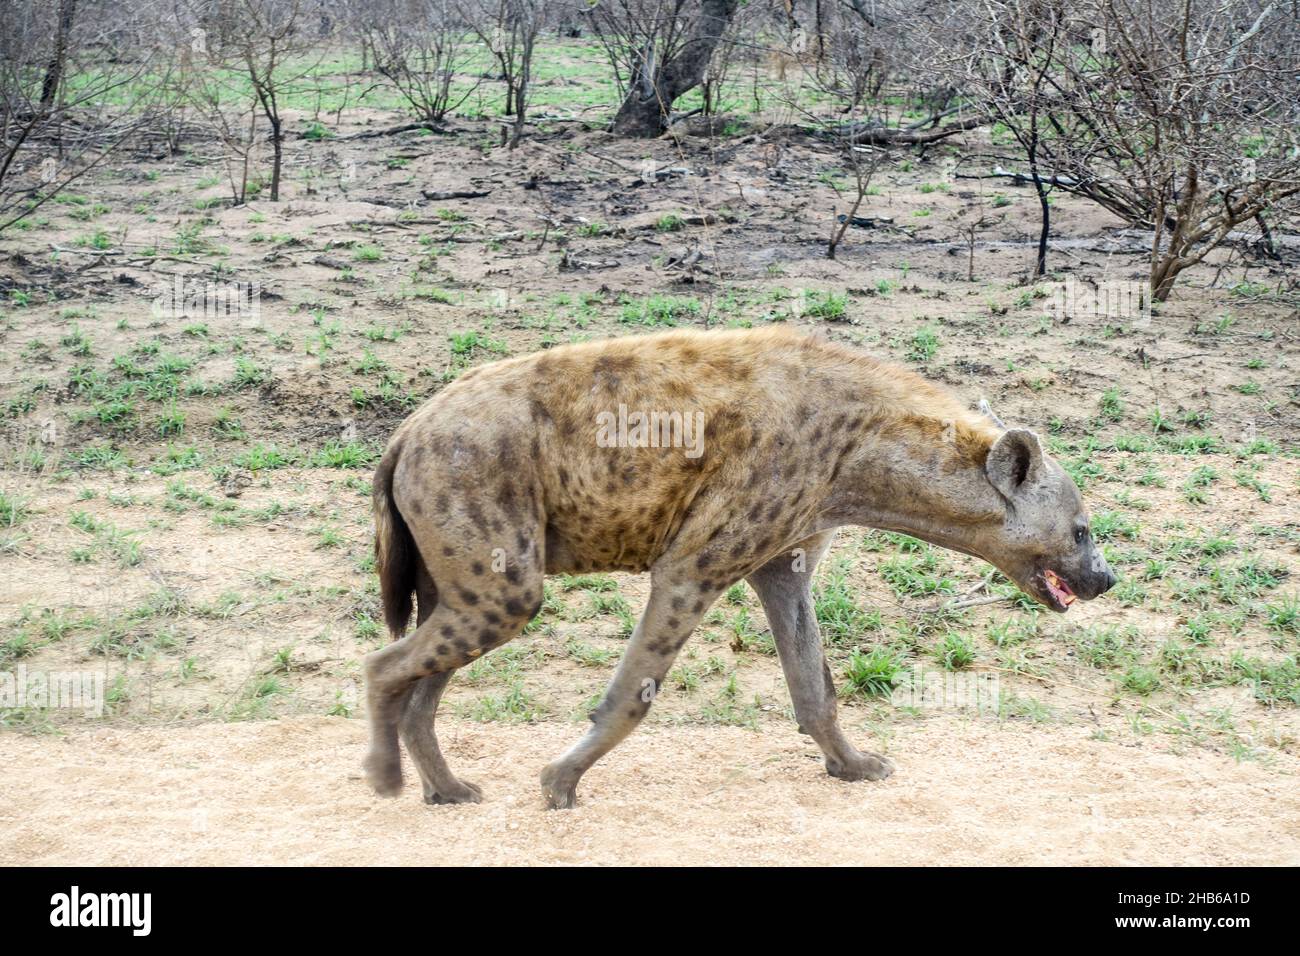 Close-up of a Hyena in the Kruger National Park, South Africa Stock Photo